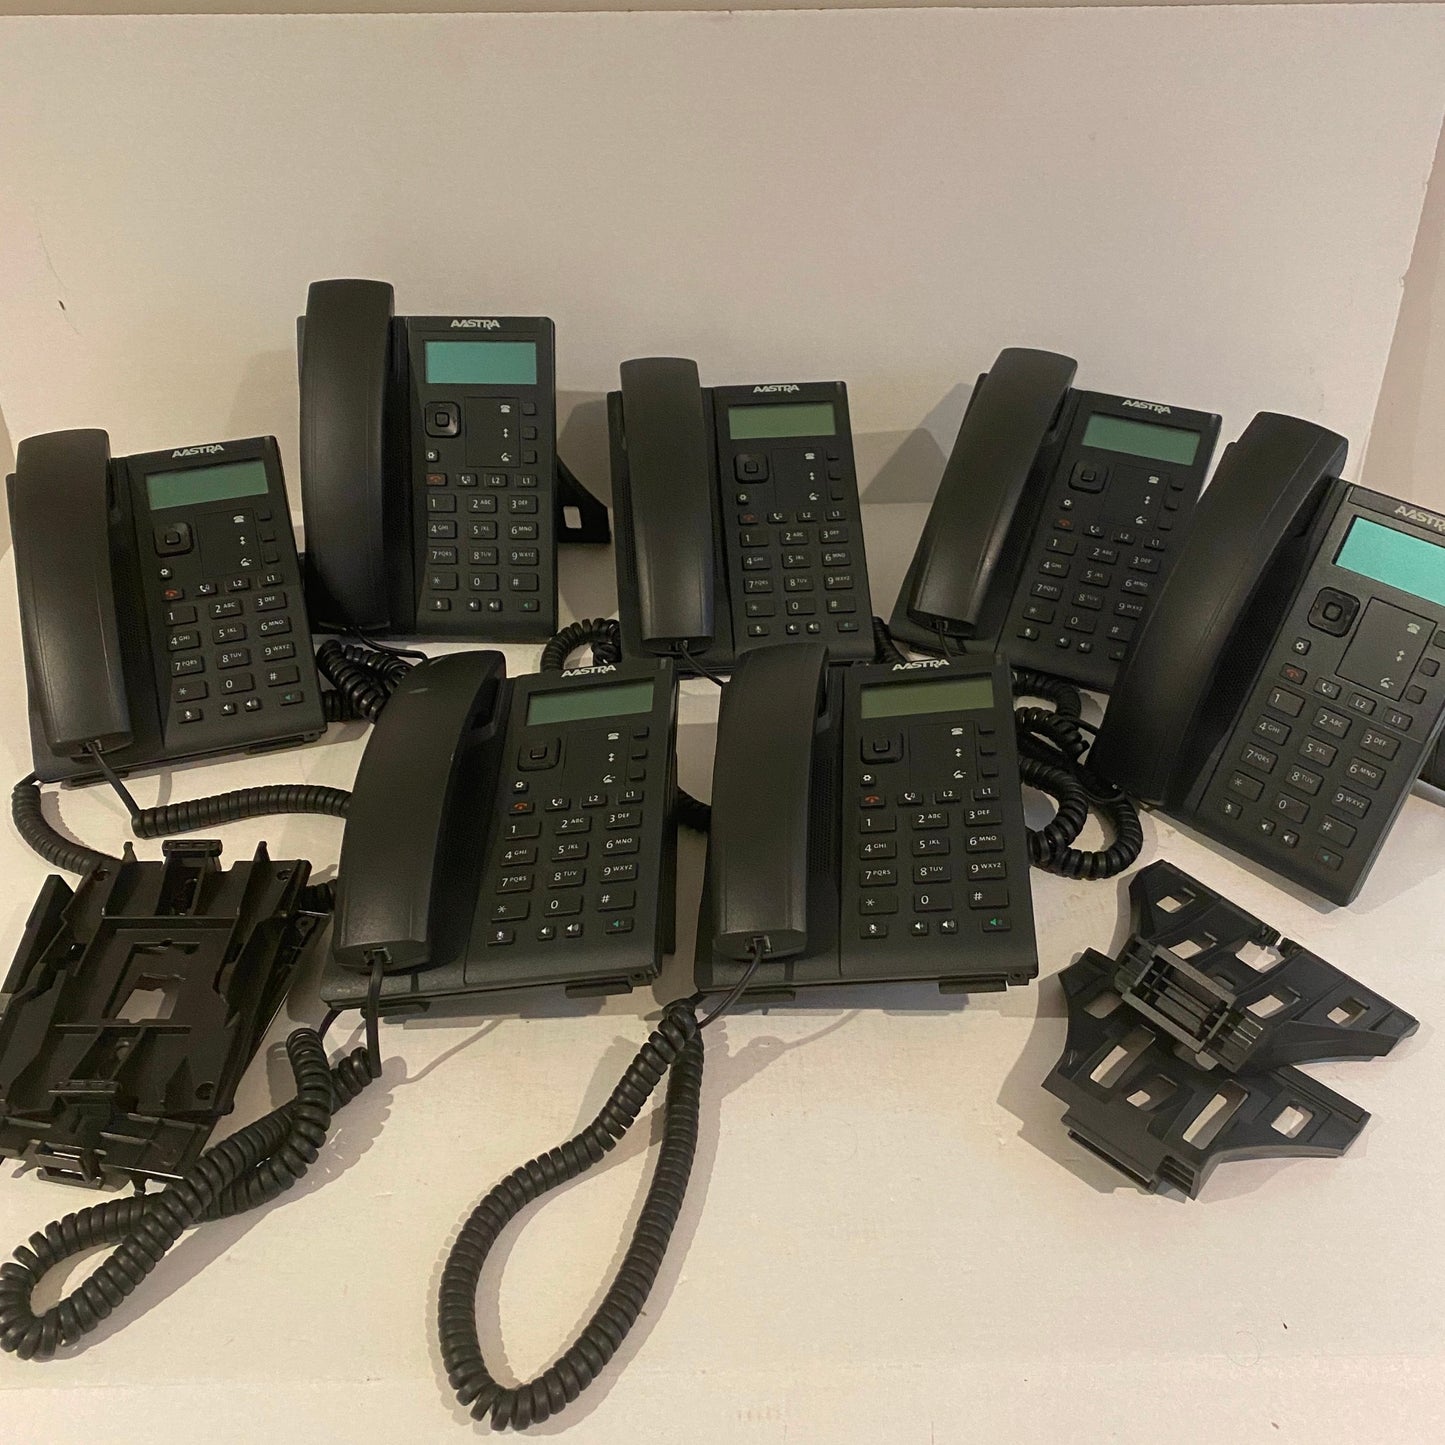 Lot of 7 - Aastra Mitel 6863i VoIP Business Phone Handset And Stand